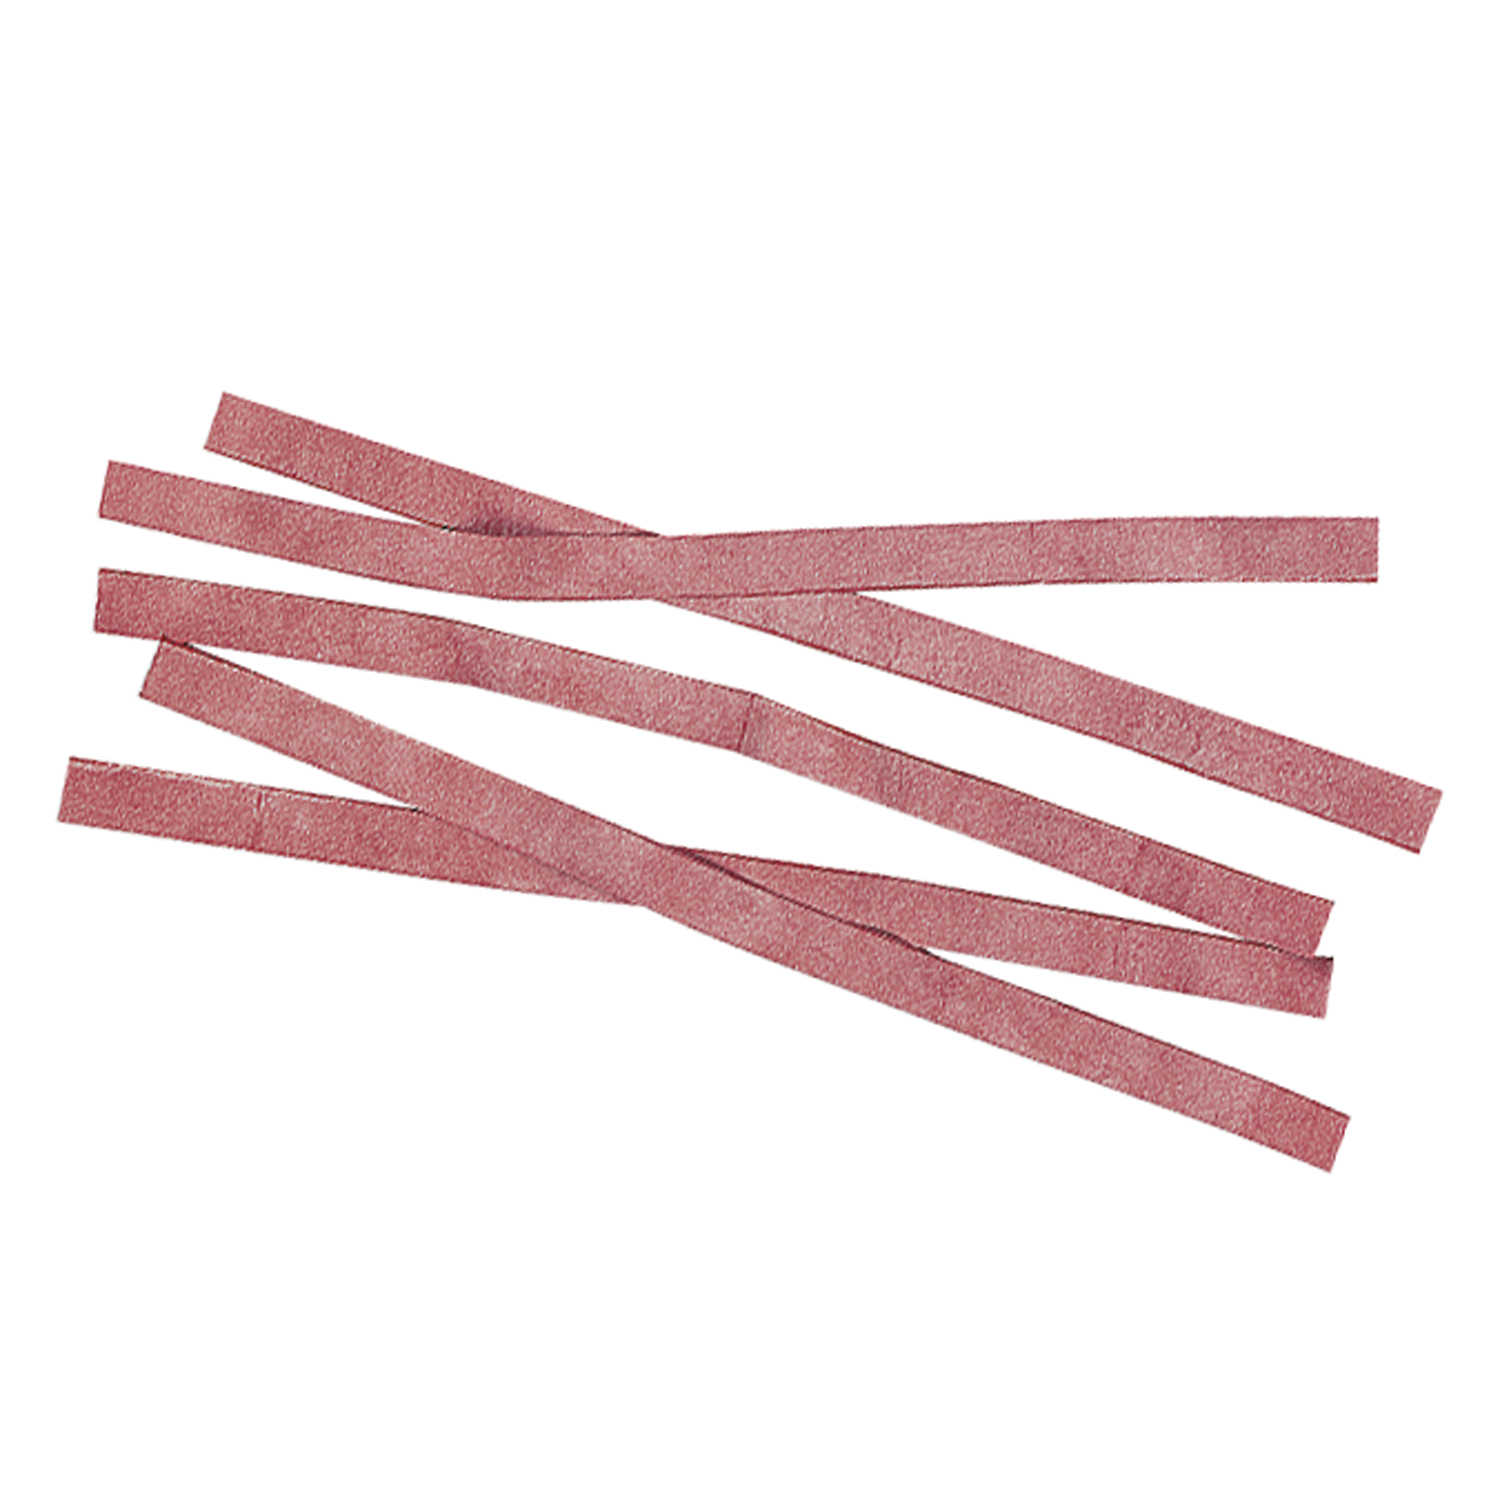 Red Rubber Budding Strips | Forestry Suppliers, Inc.